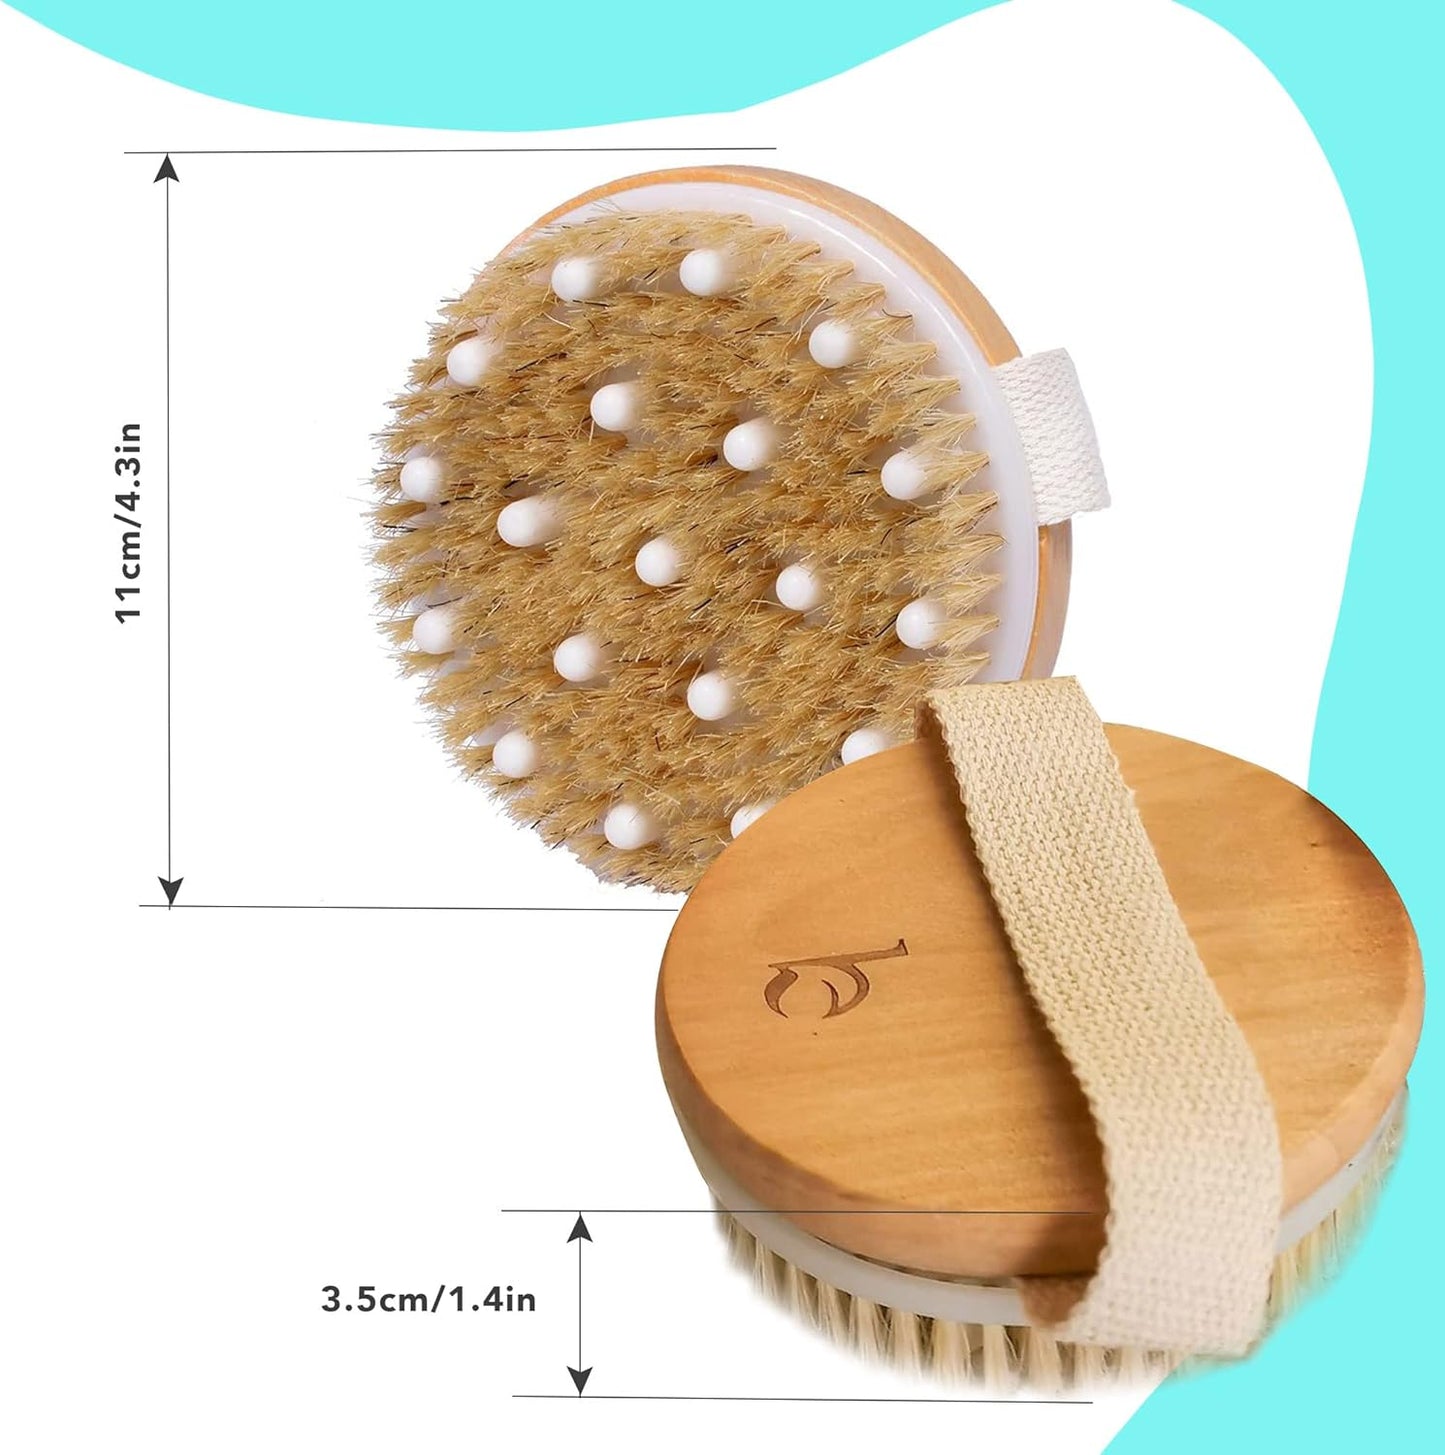 Dry Brushing Body Brush for Lymphatic Drainage & Cellulite - Round Dry Brush for Body Natural Bristle Body Brush for Showering - Skin Brush for Dry Brushing Bath and Exfoliating